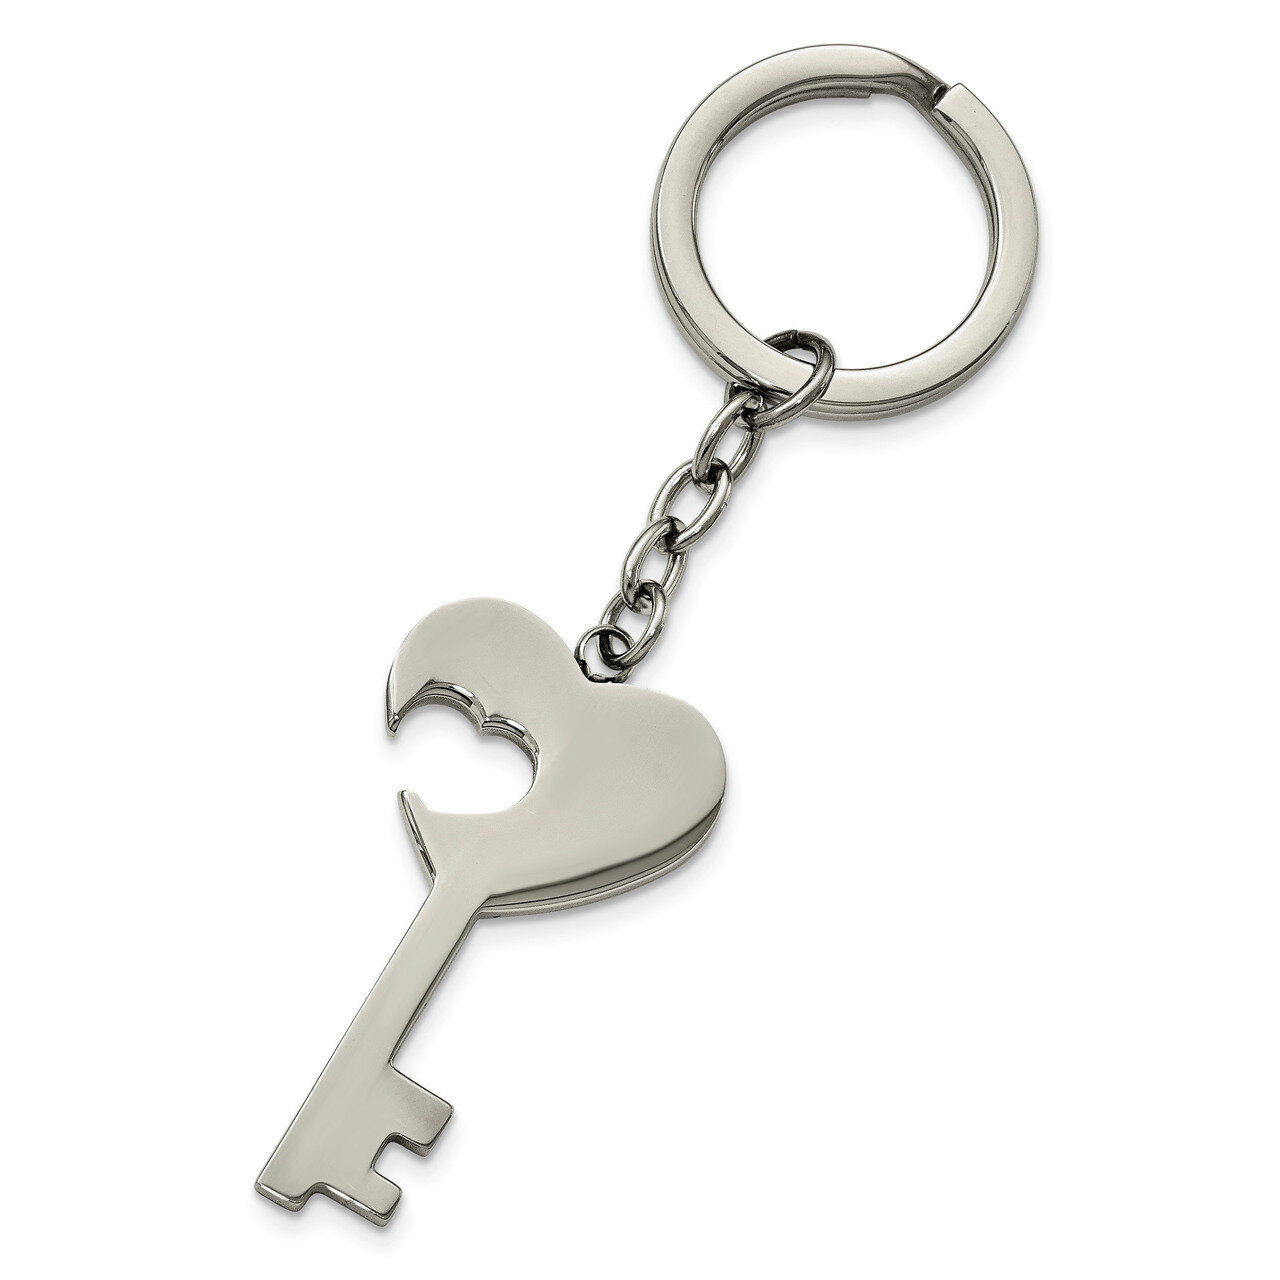 Polished Key with Heart Cut-out Key Ring Stainless Steel SRK139